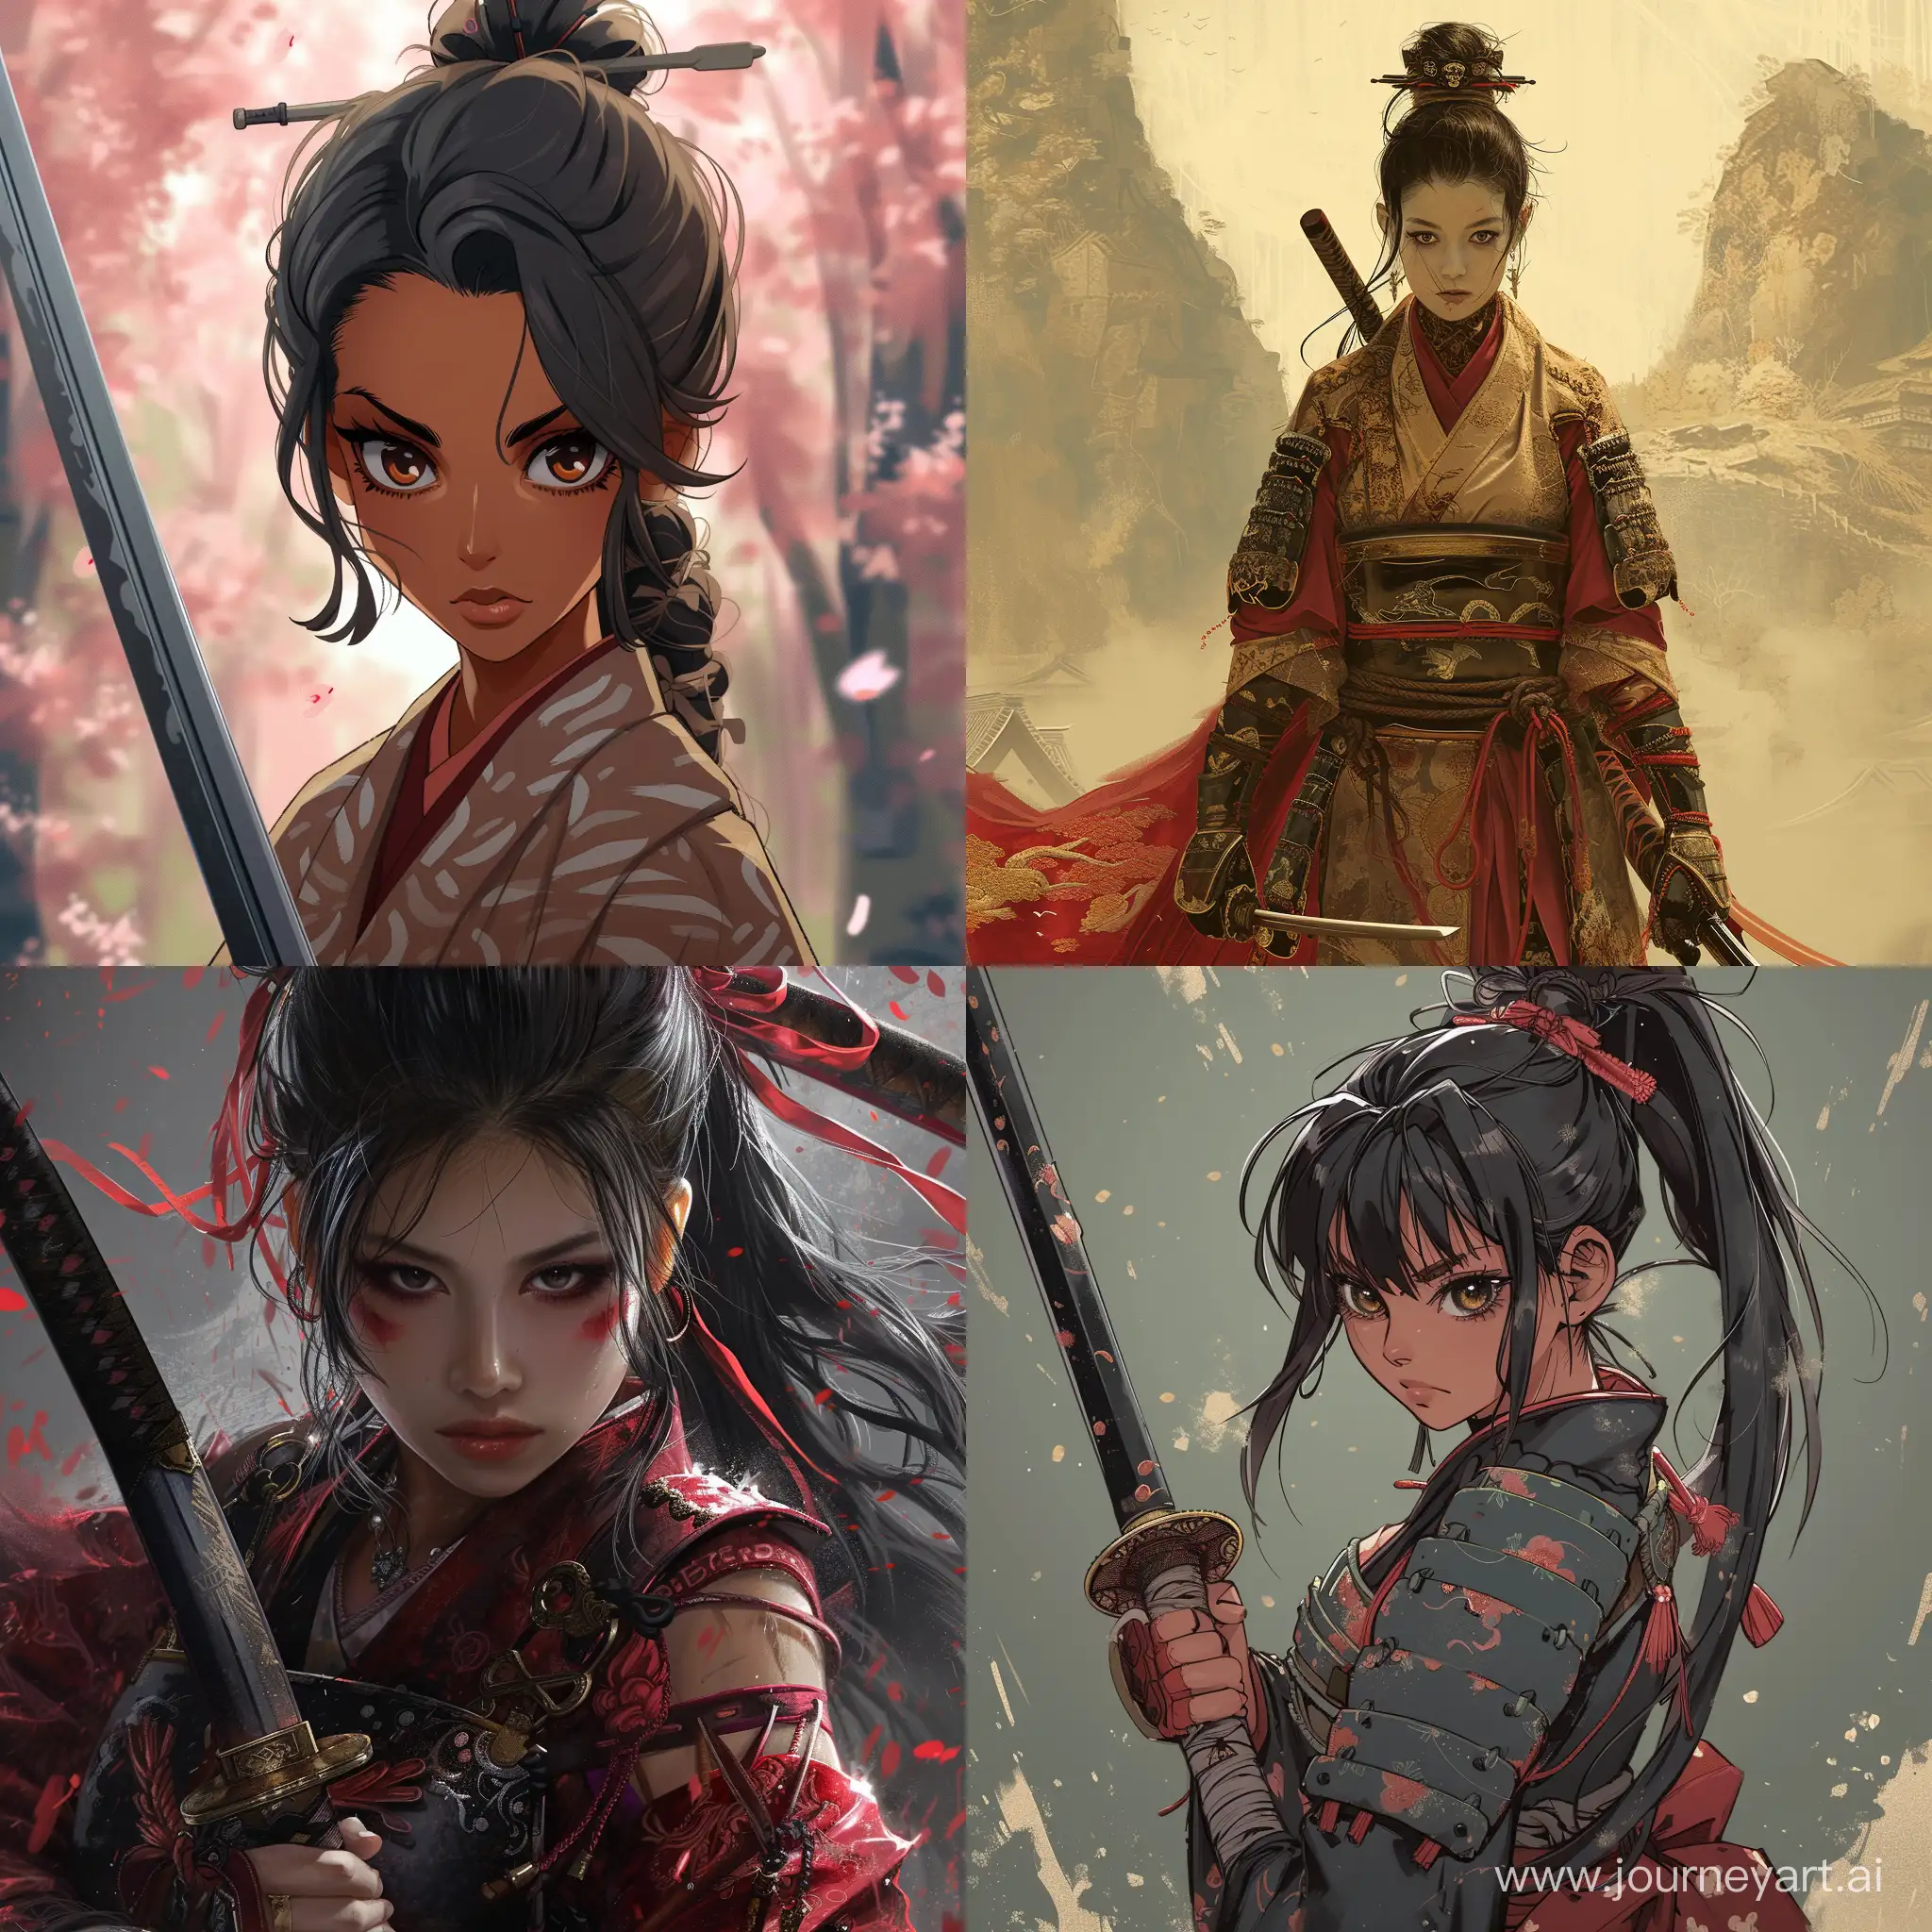 Stylized-Samurai-Girl-Art-with-a-11-Aspect-Ratio-and-Unique-Details